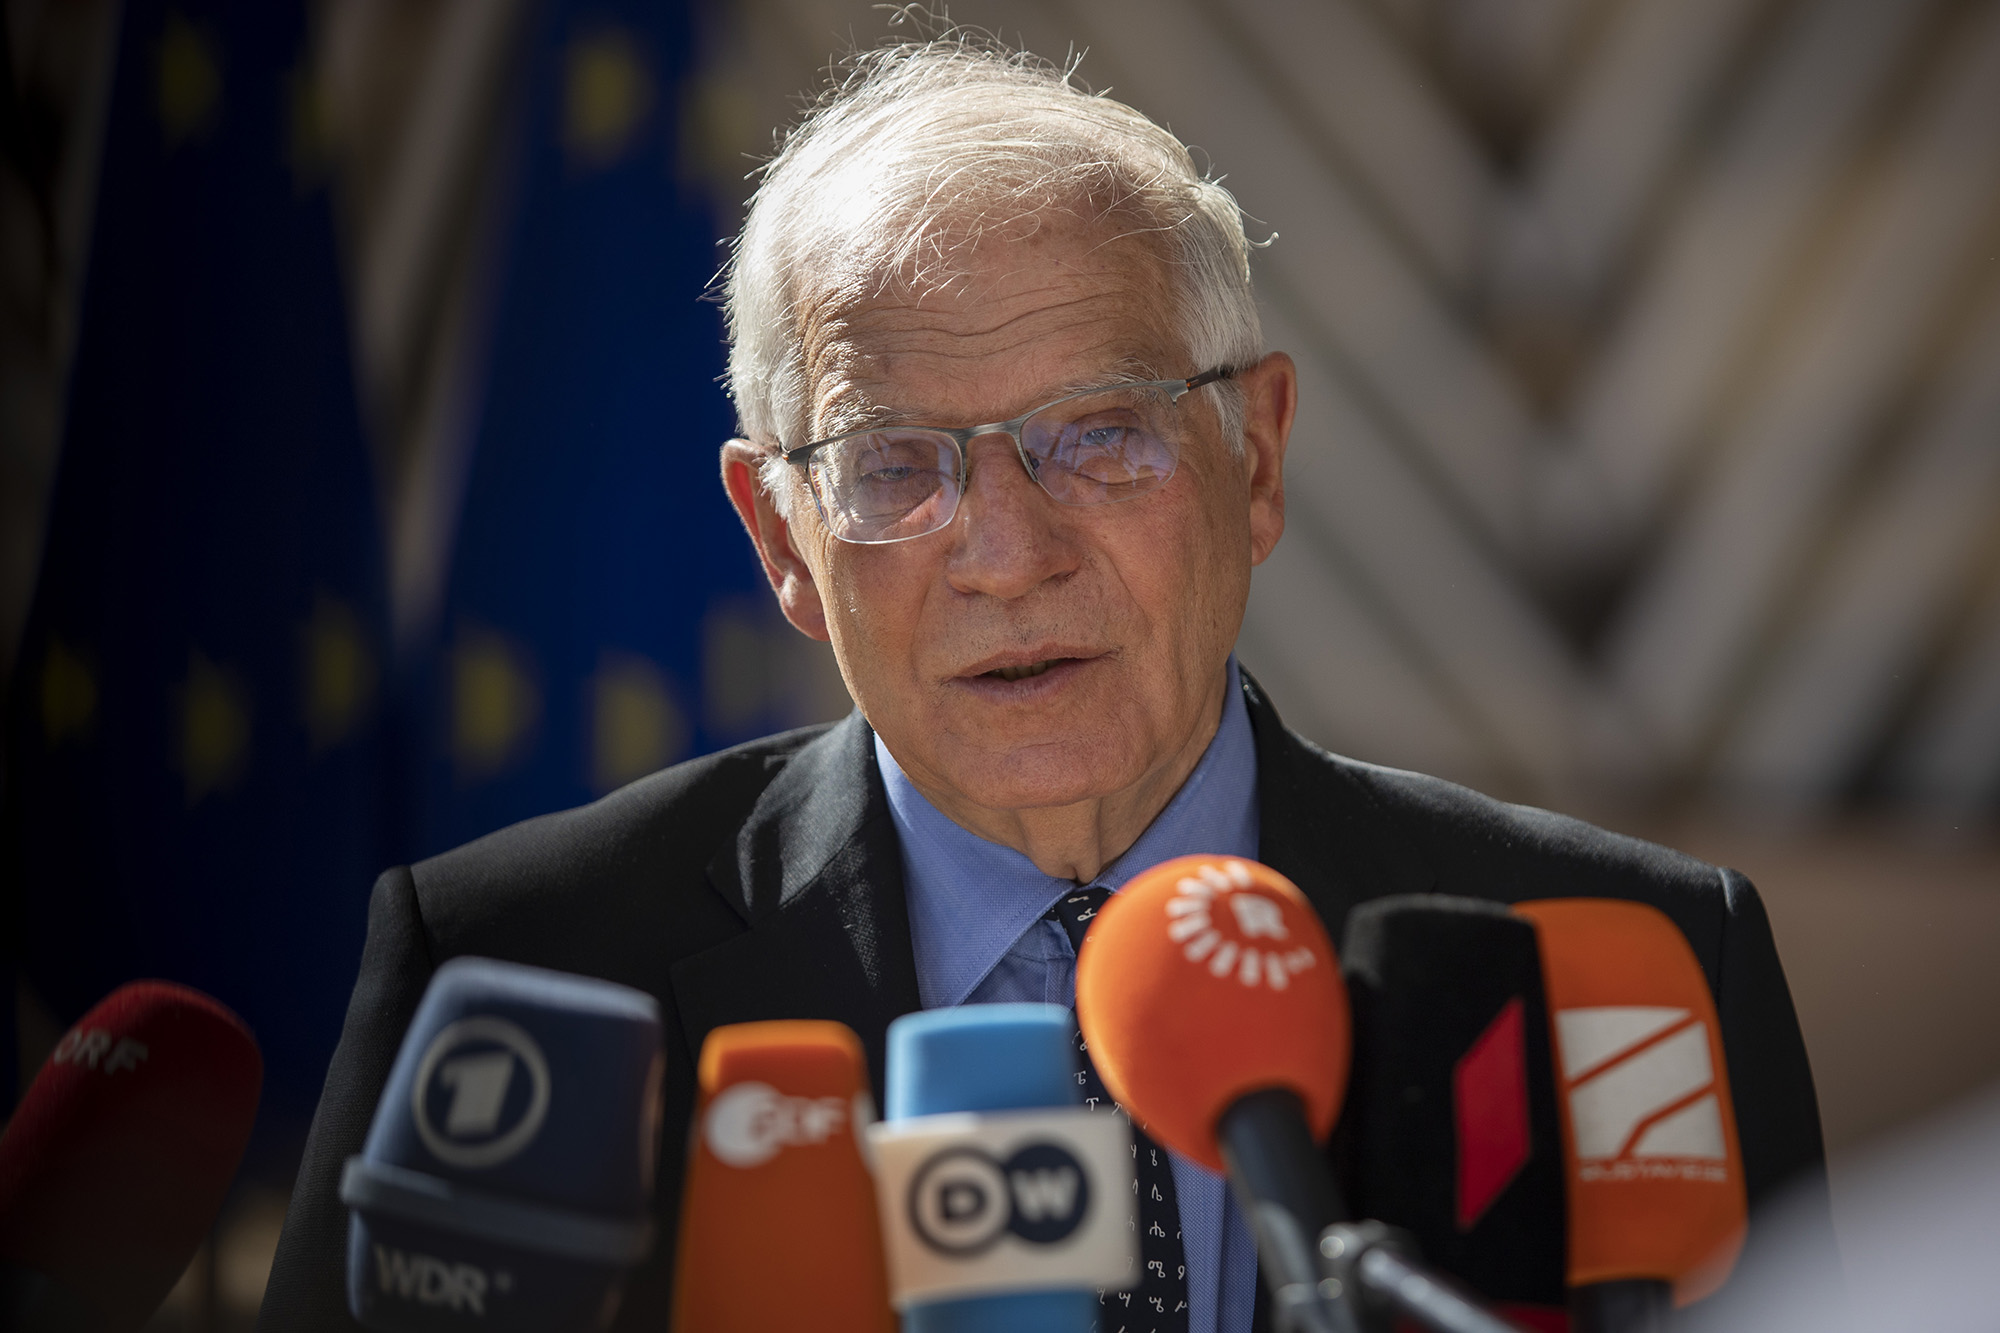 Josep Borrell, the High Representative of the Union for Foreign Affairs and Security Policy arrives at the extraordinary special EU summit about Ukraine, Energy and Defence, in Brussels, Belgium, on May 31.